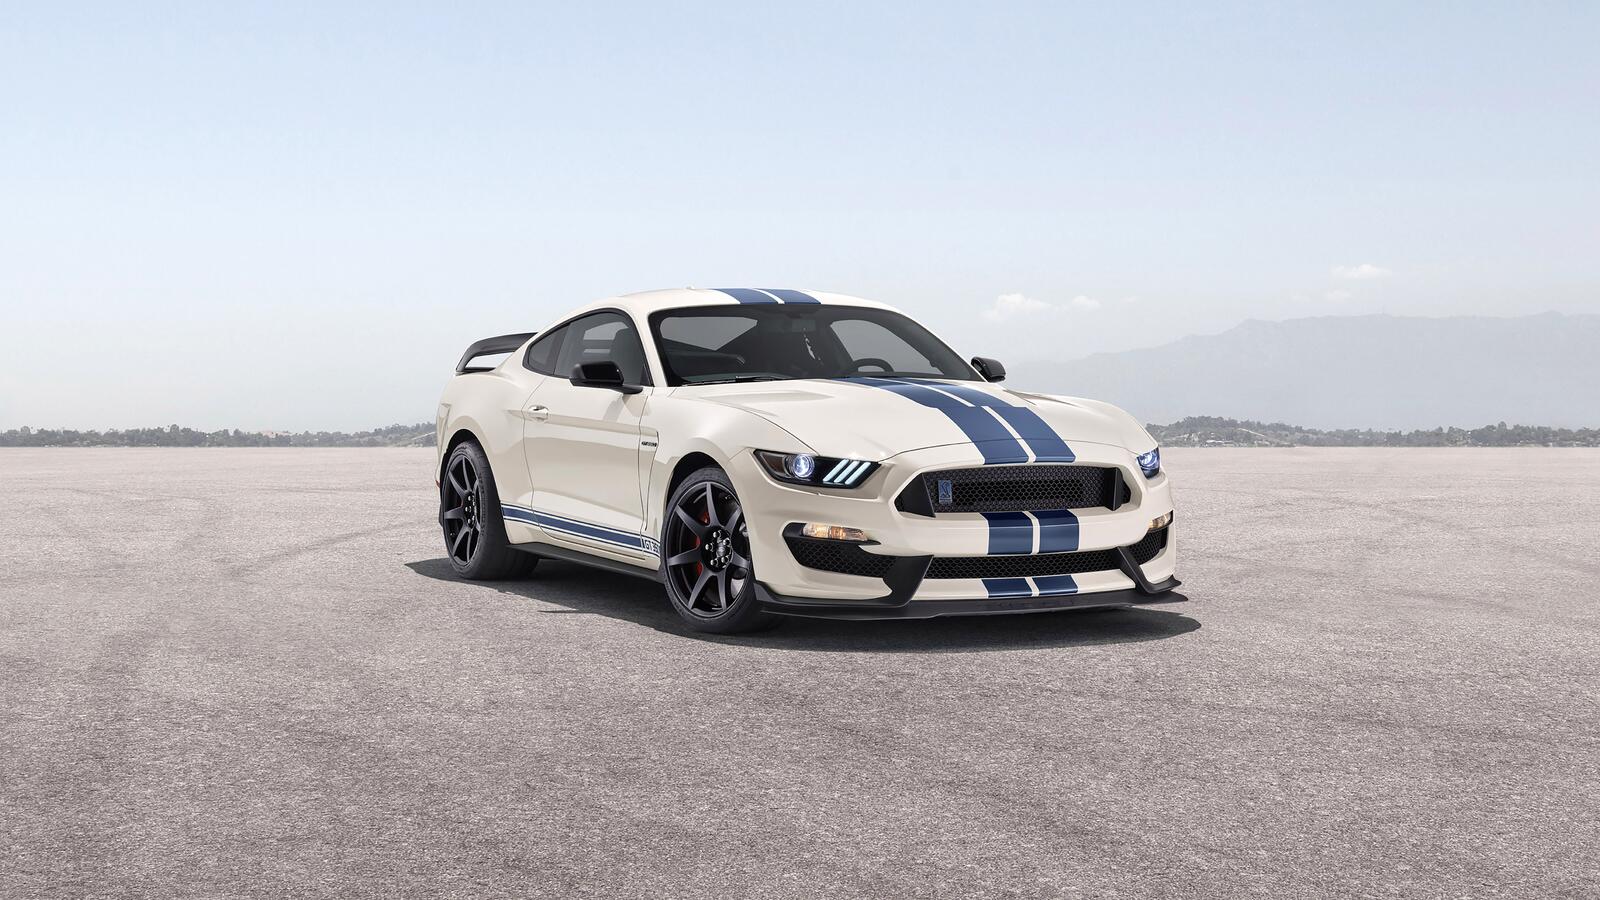 Free photo White ford mustang shelby gt350 with blue stripes on the hood